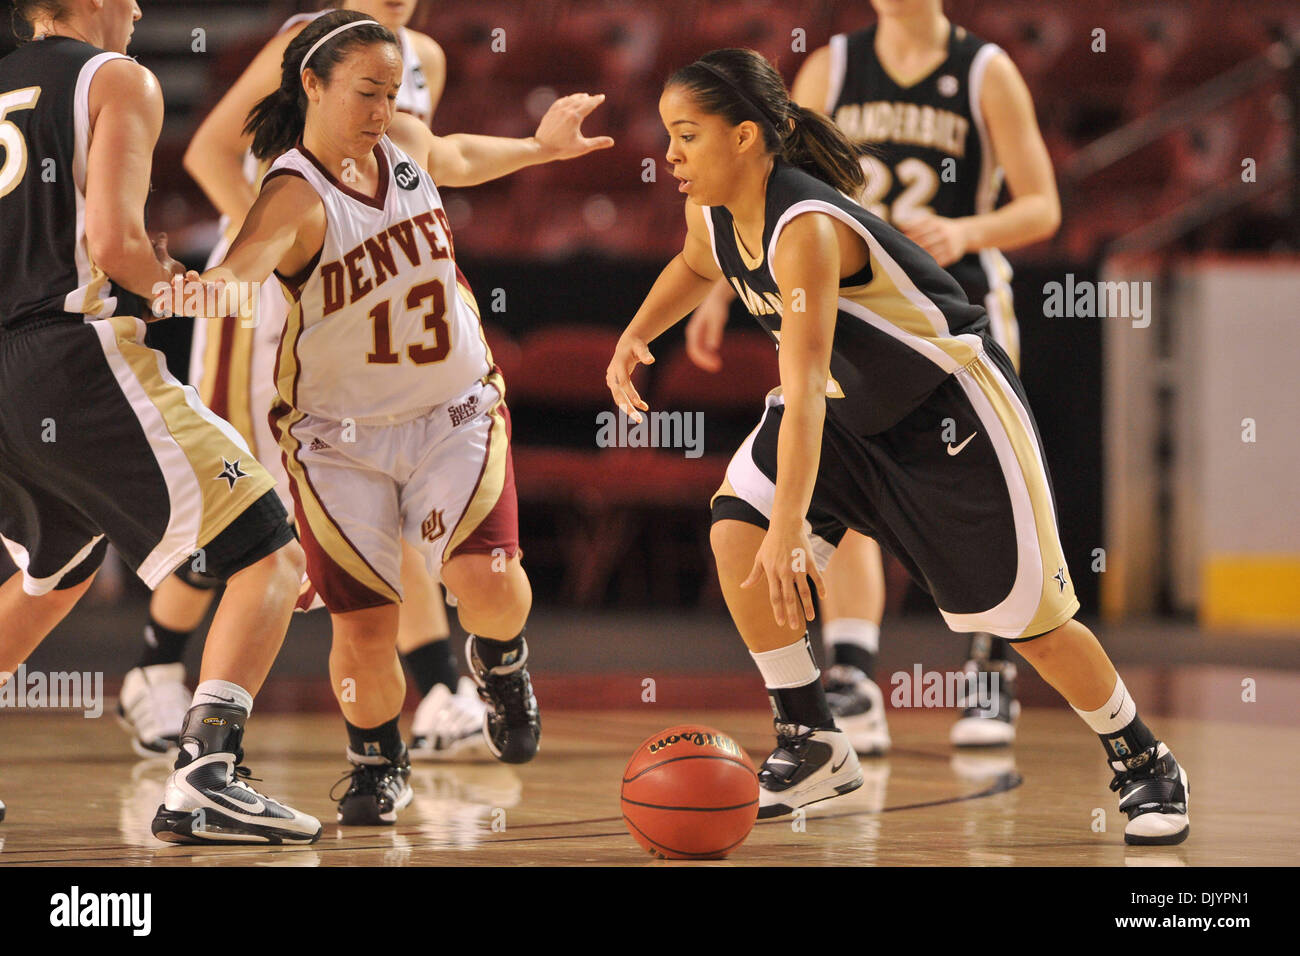 Dec. 5, 2010 - Denver, Colorado, United States of America - Vanderbilt's Jasmine Lister (11) drives with the ball on Denver's Emiko Smith (13). The Denver Pioneers knocked off the #23 Vanderbilt Commodores by a score of 70-65  at the half at Magness Arena. (Credit Image: © Andrew Fielding/Southcreek Global/ZUMAPRESS.com) Stock Photo